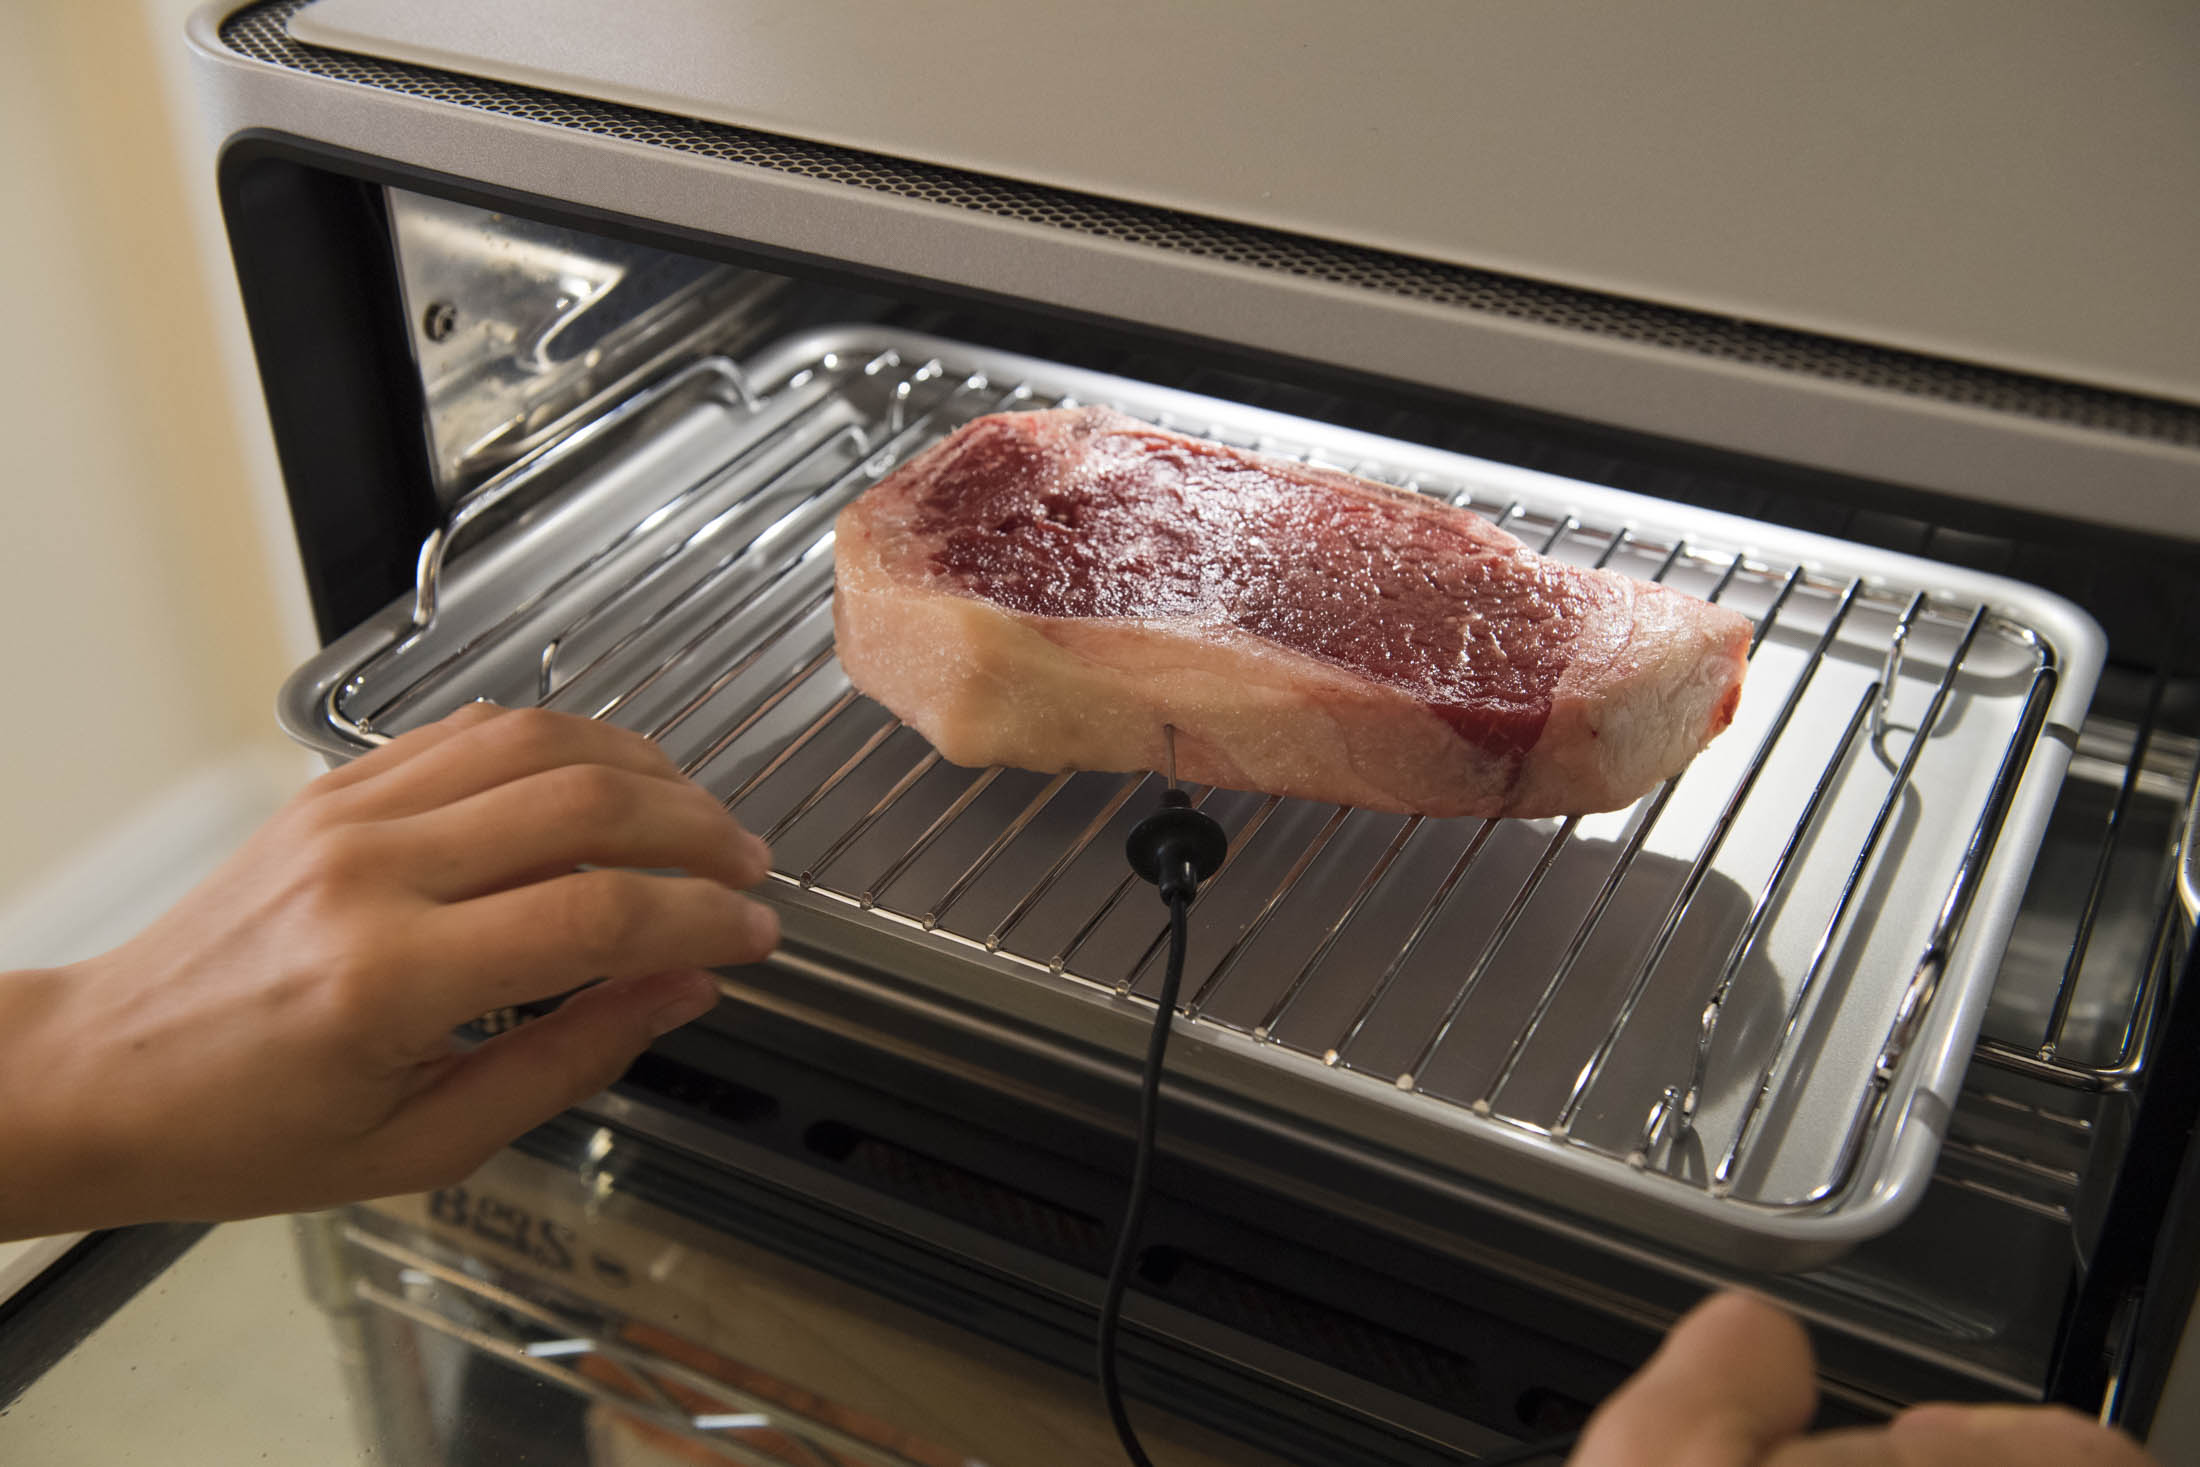 June Oven Review: Can This Device Really Replace Home Cooks? - Bloomberg